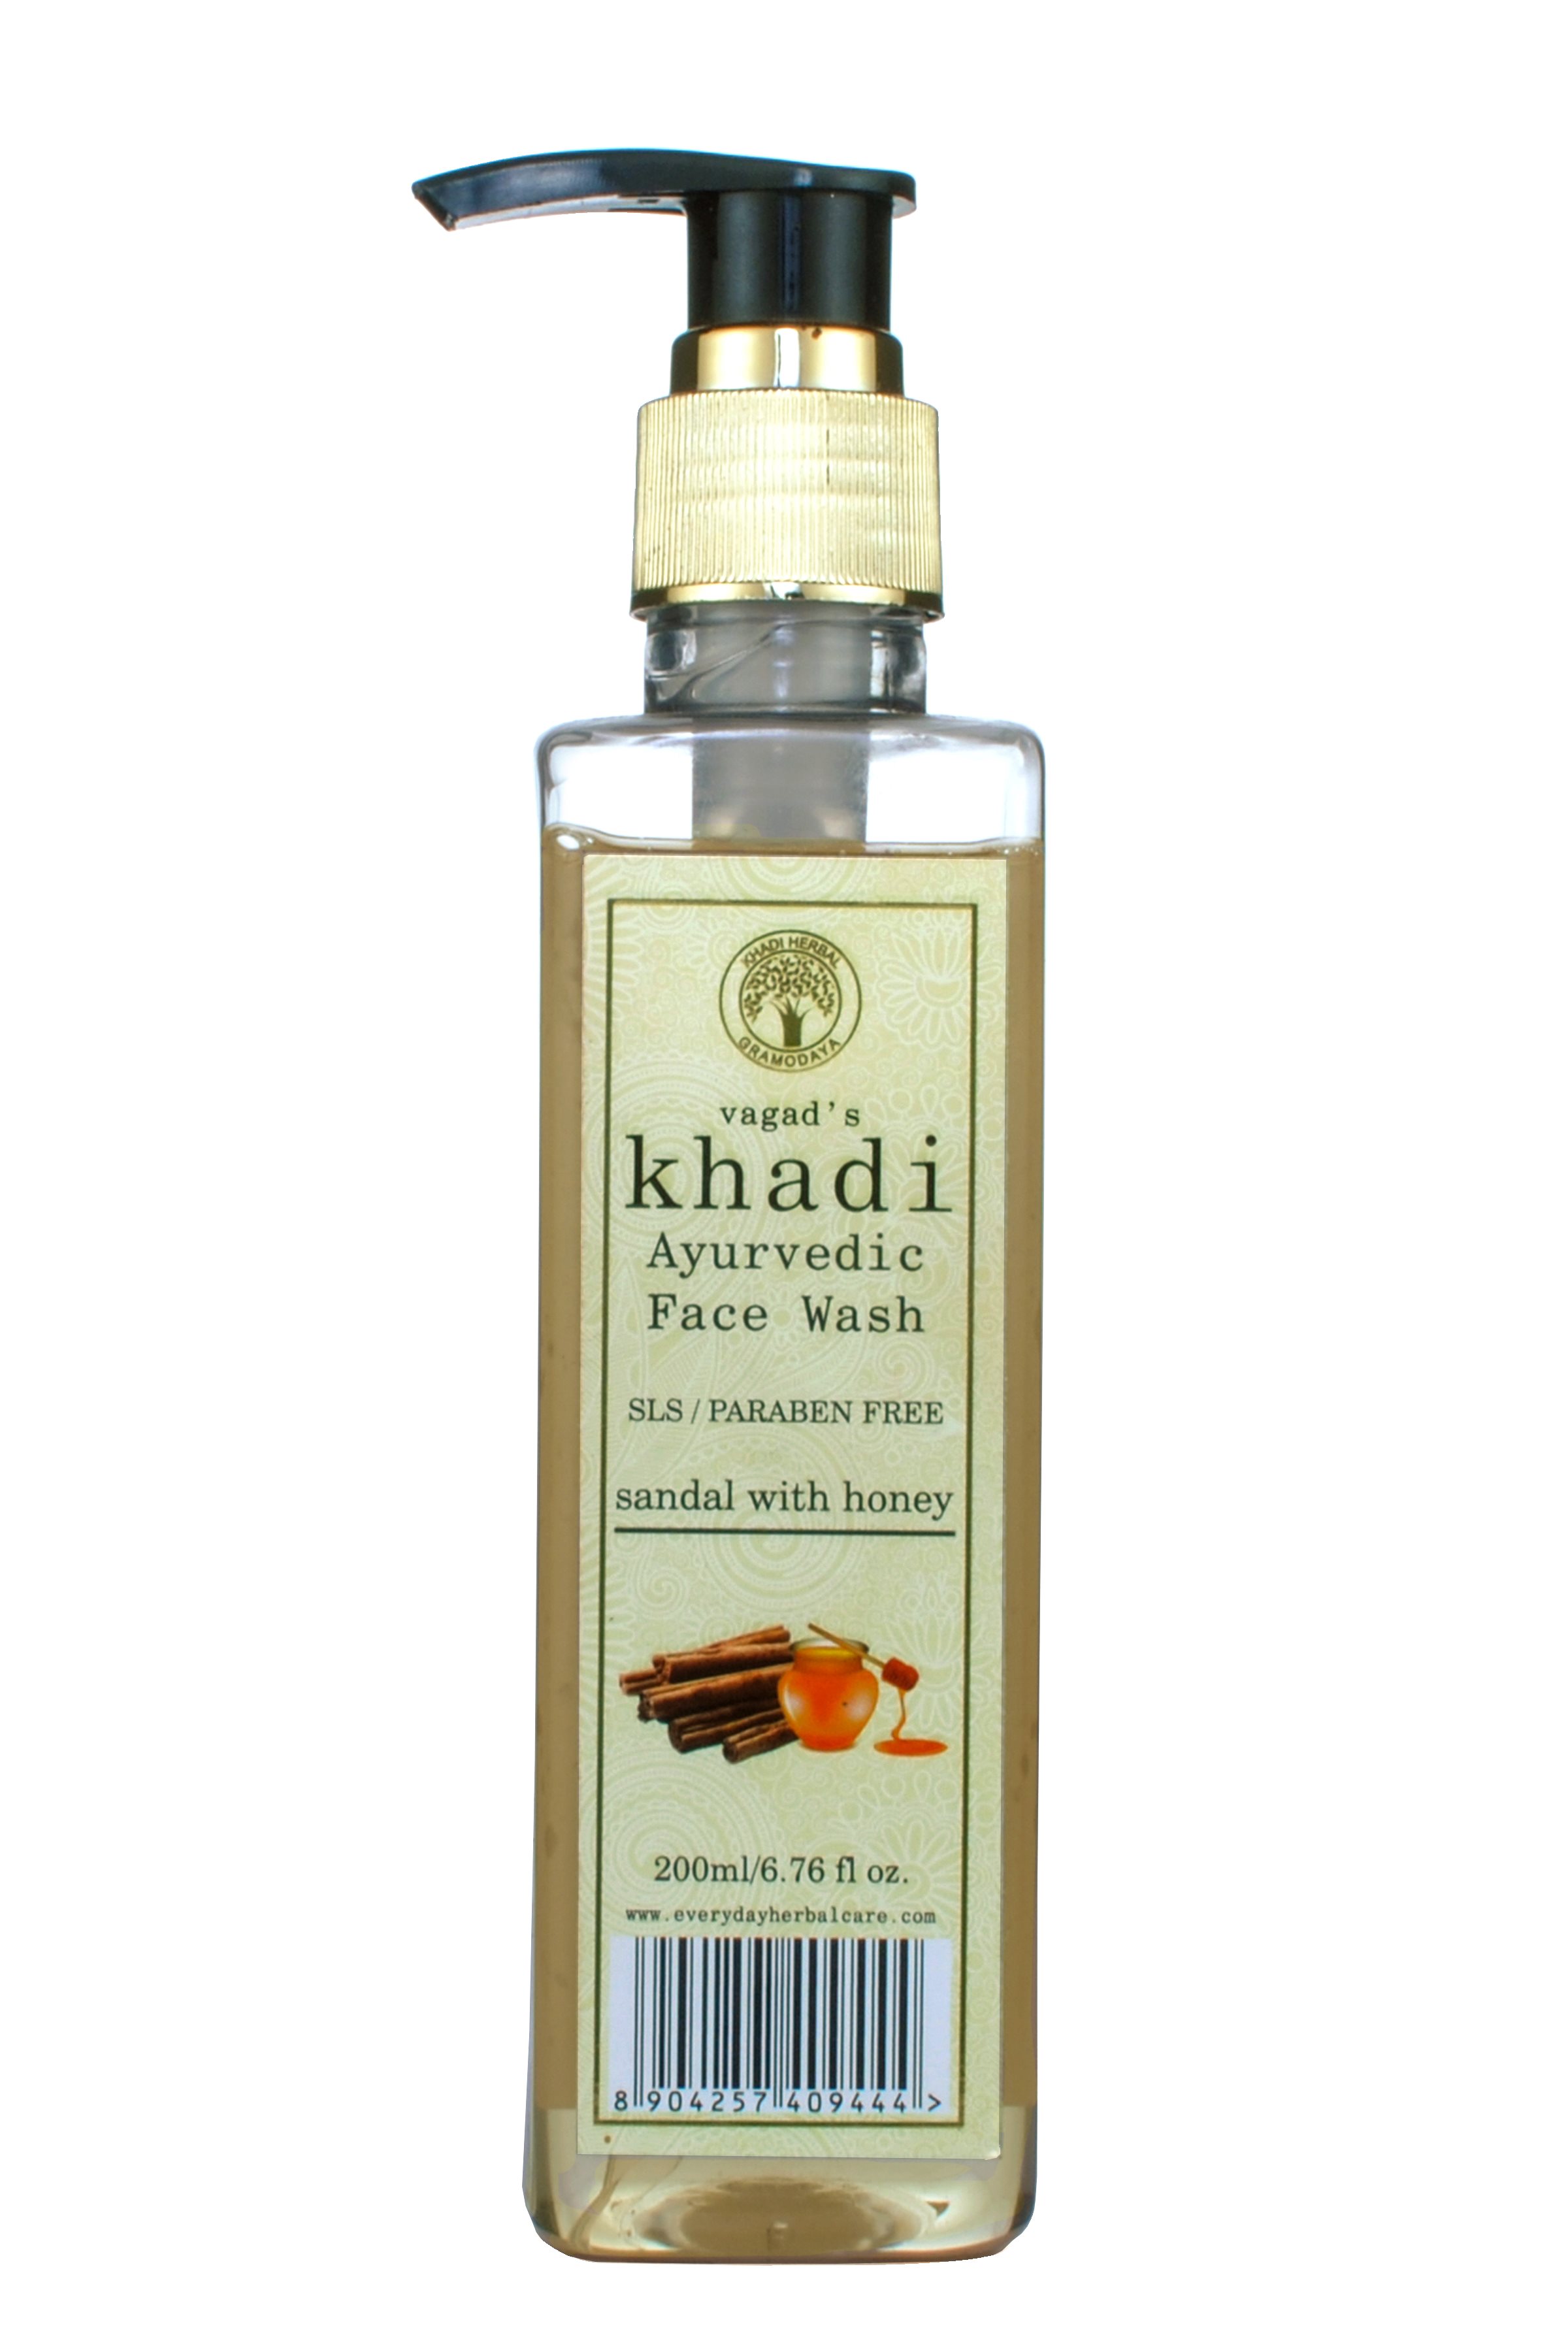 Buy Vagad's Khadi S.L.S And Paraben Free Sandal With Honey Face Wash at Best Price Online